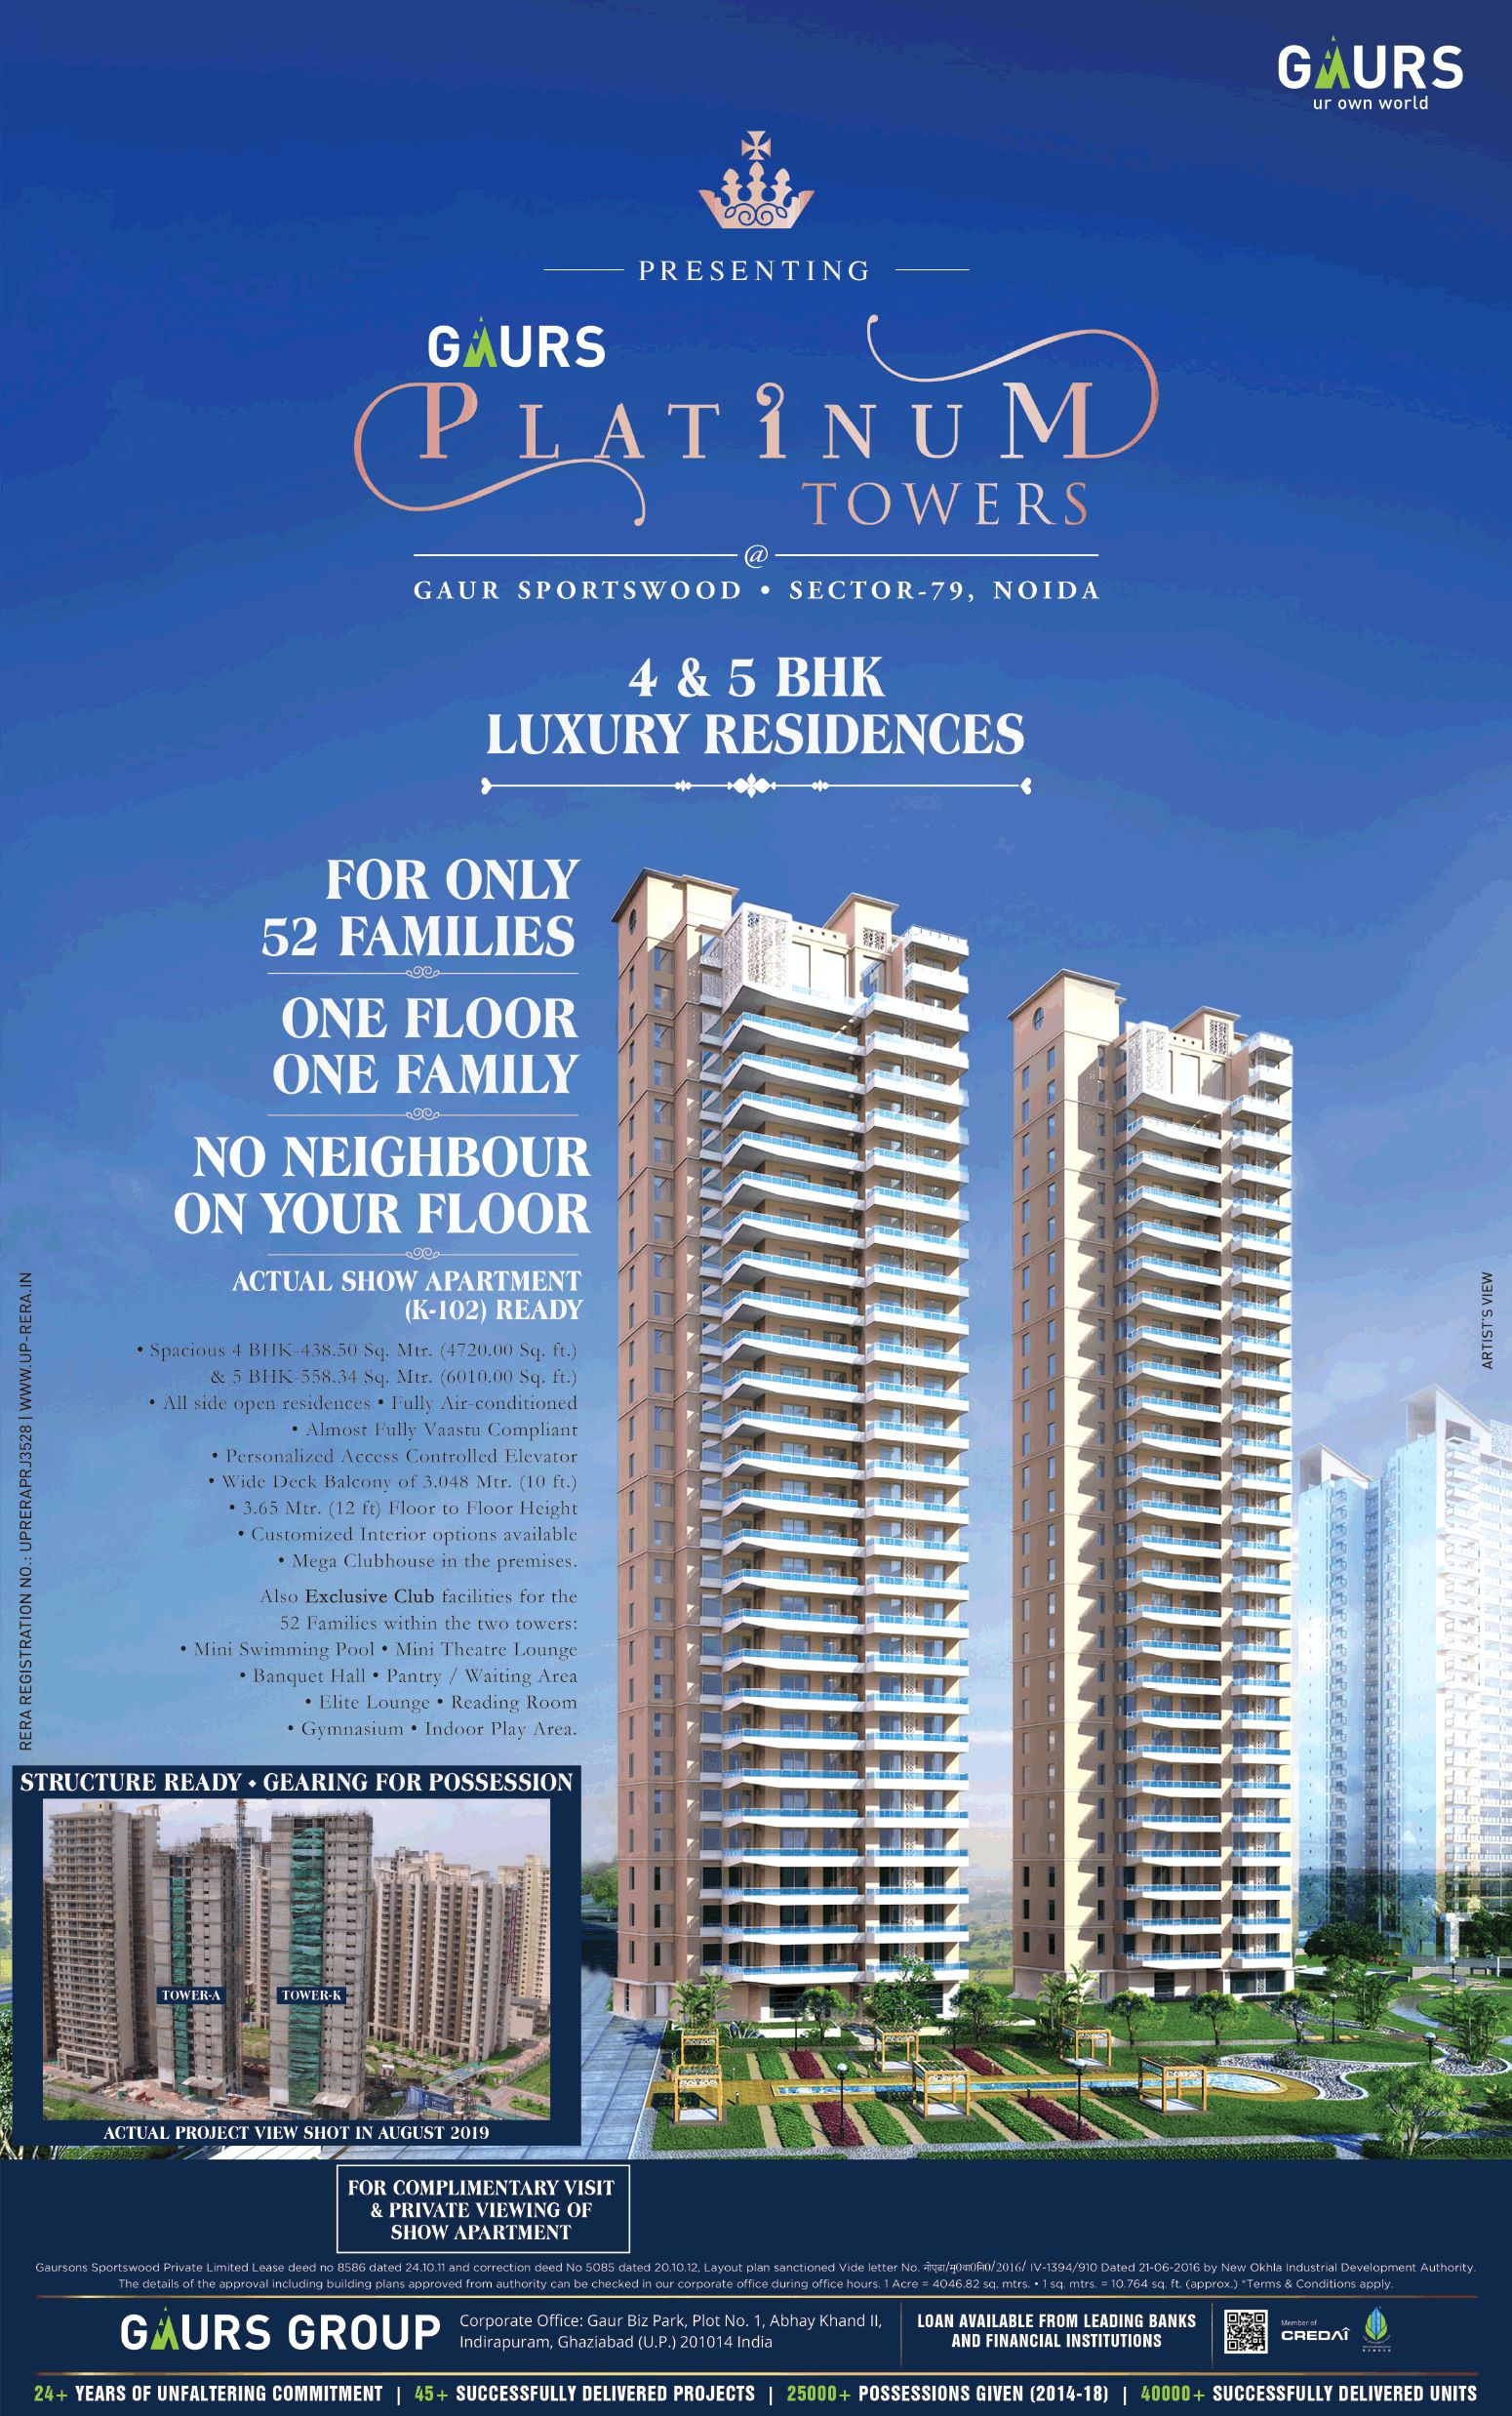 Book 4/5 BHK luxury residences at Gaurs Platinum Towers in Sector 79, Noida Update